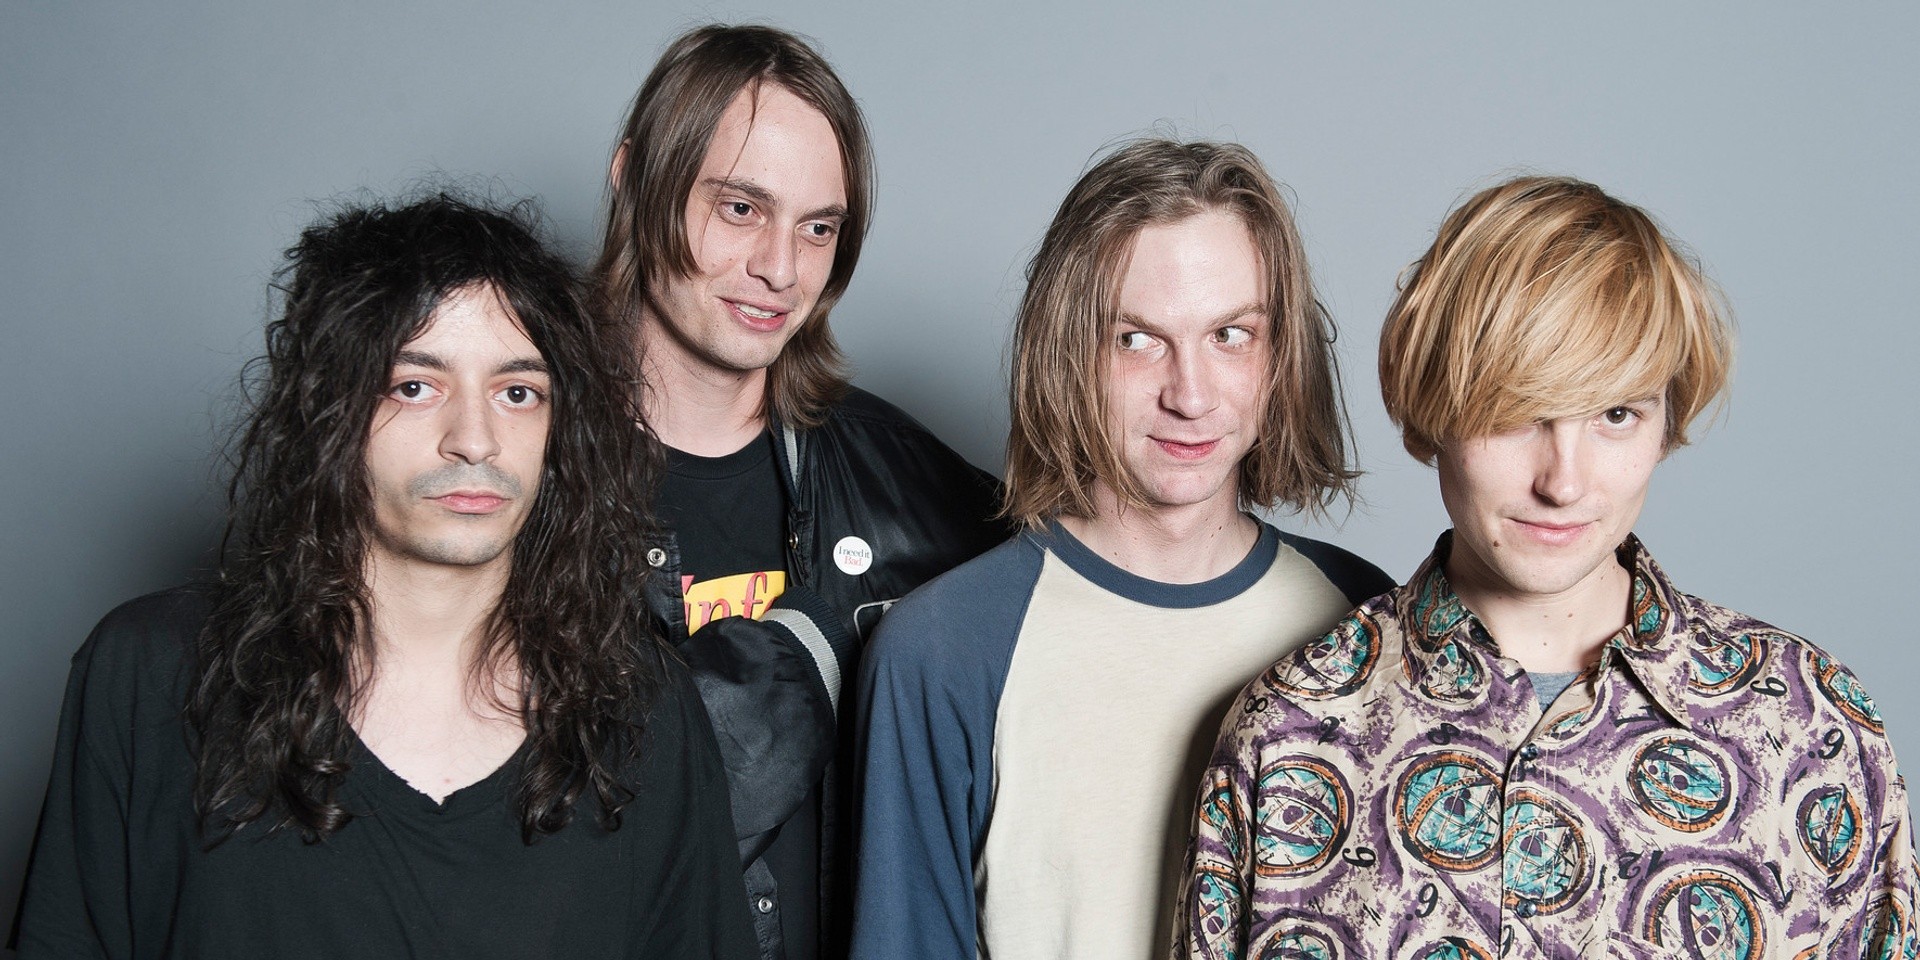 DIIV will not be playing at Laneway Festival Singapore